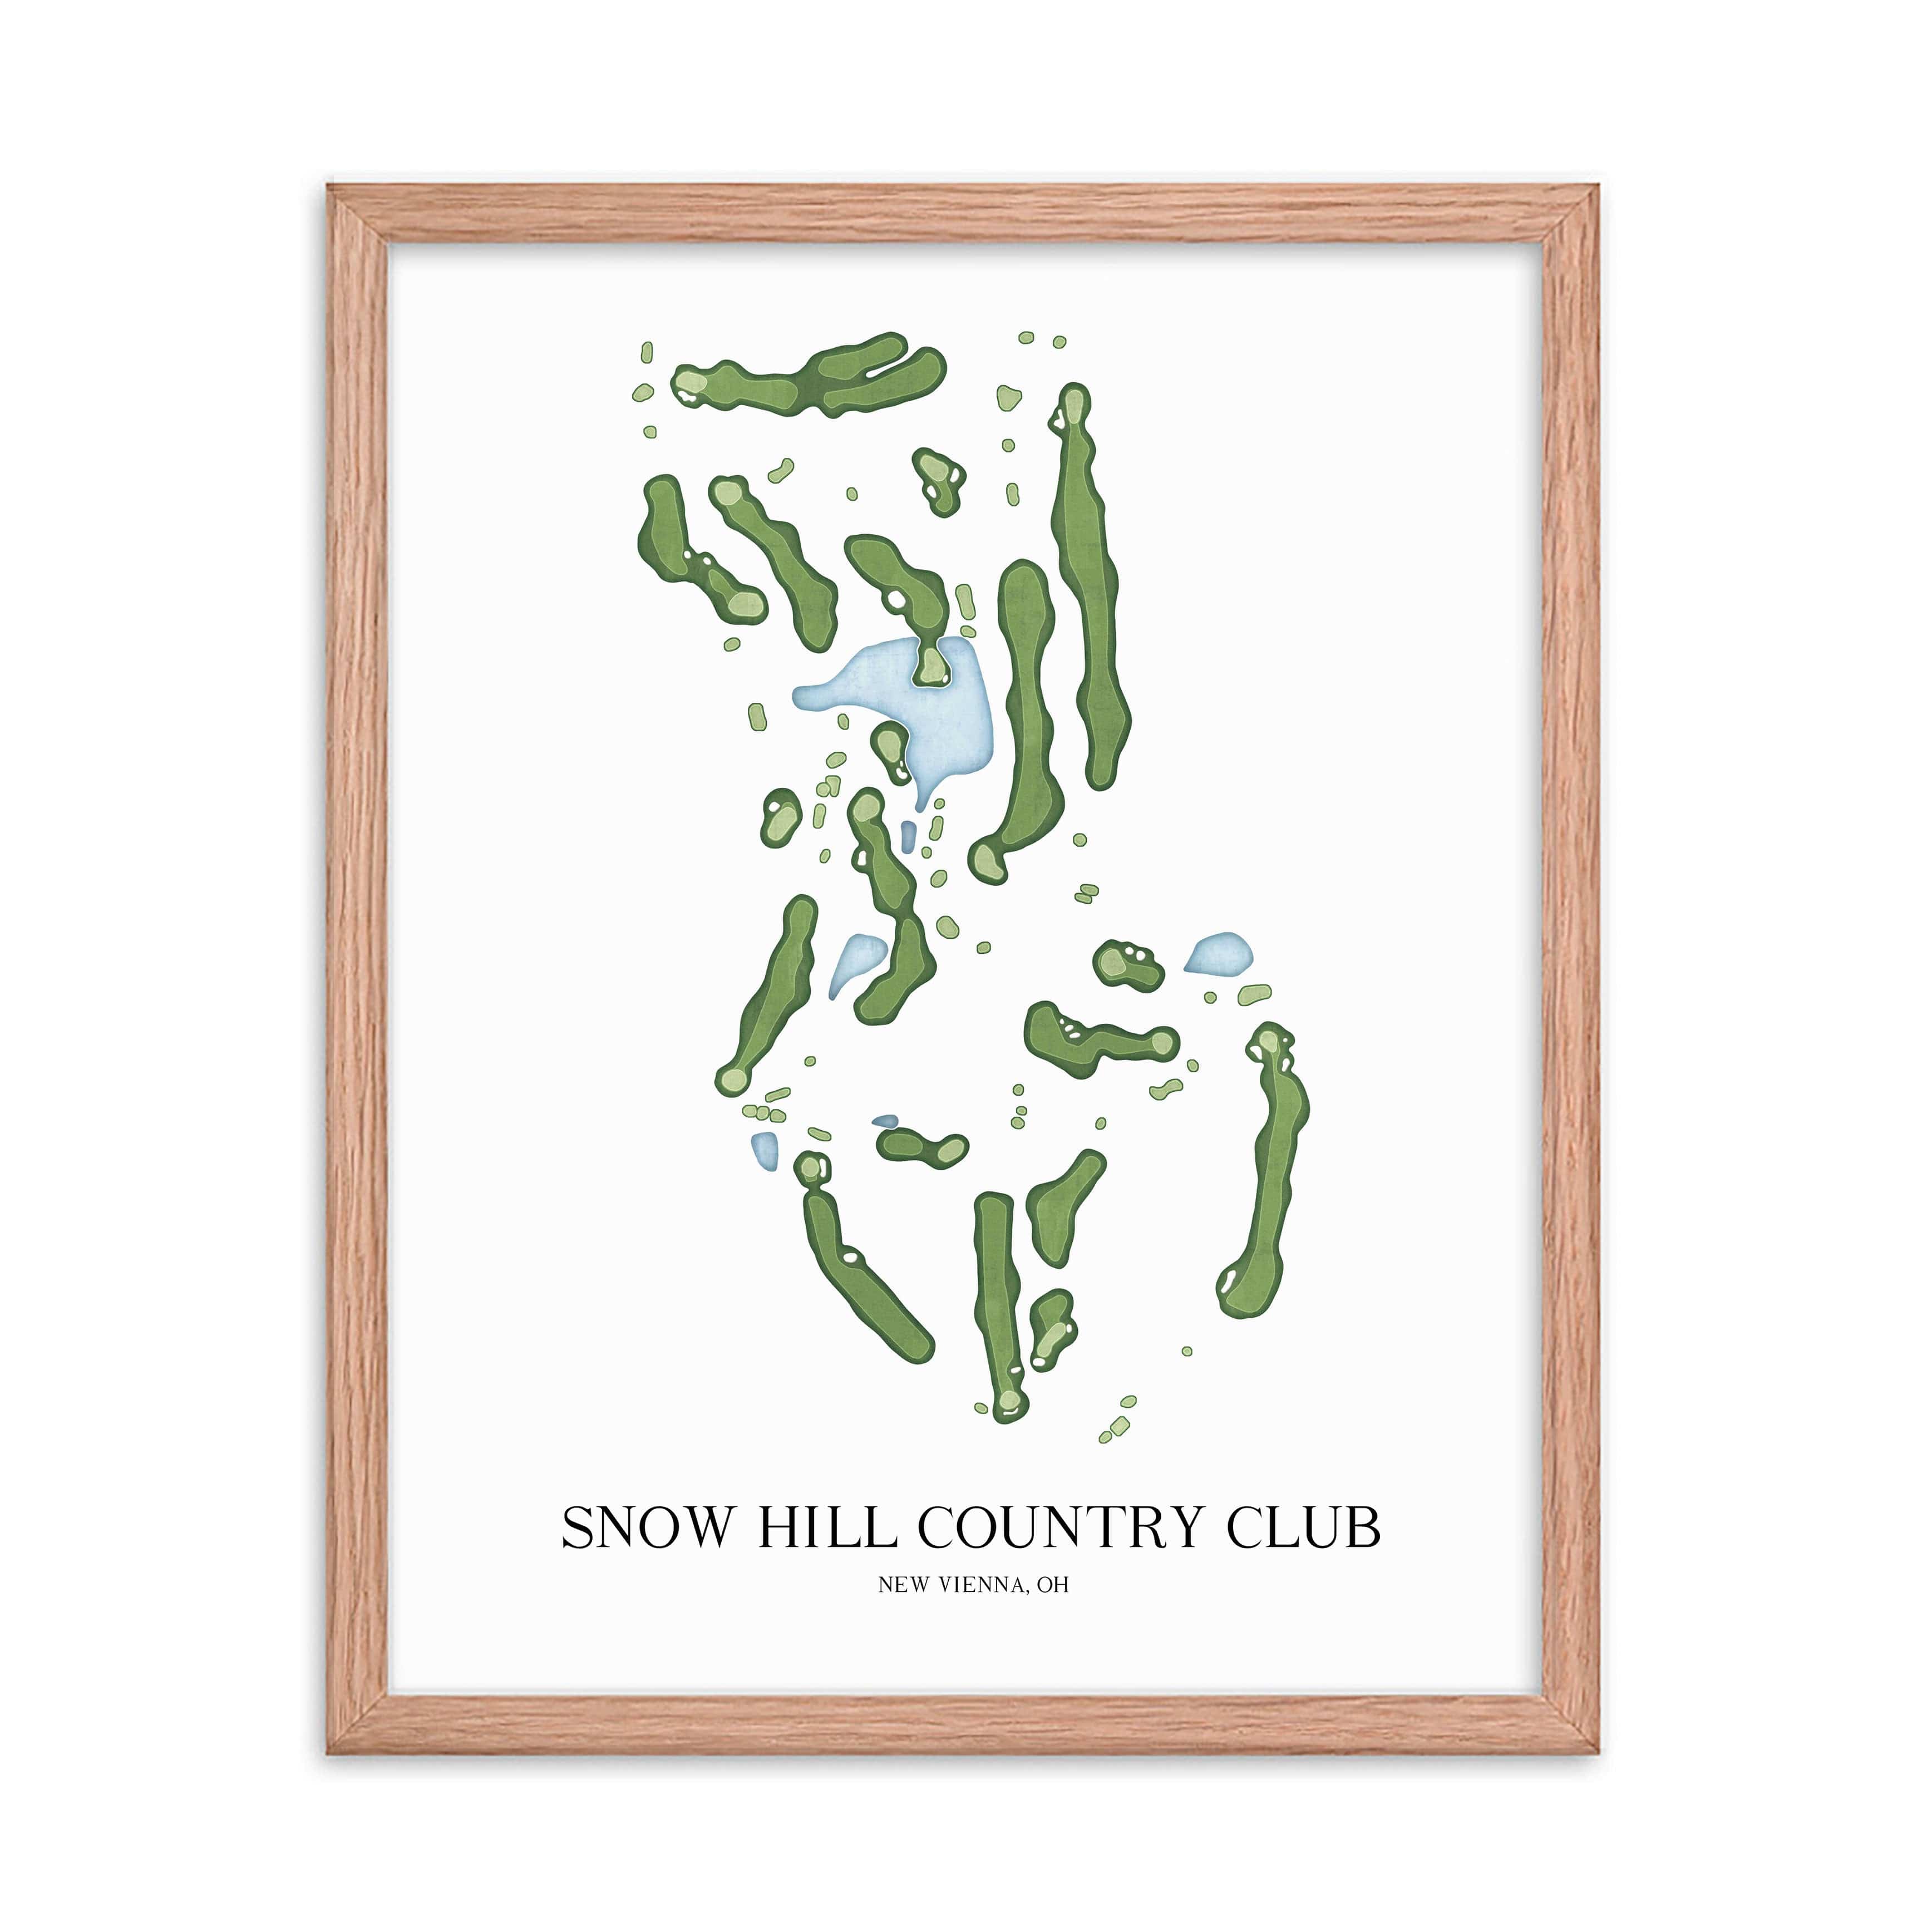 The 19th Hole Golf Shop - Golf Course Prints -  Snow Hill Country Club Golf Course Map